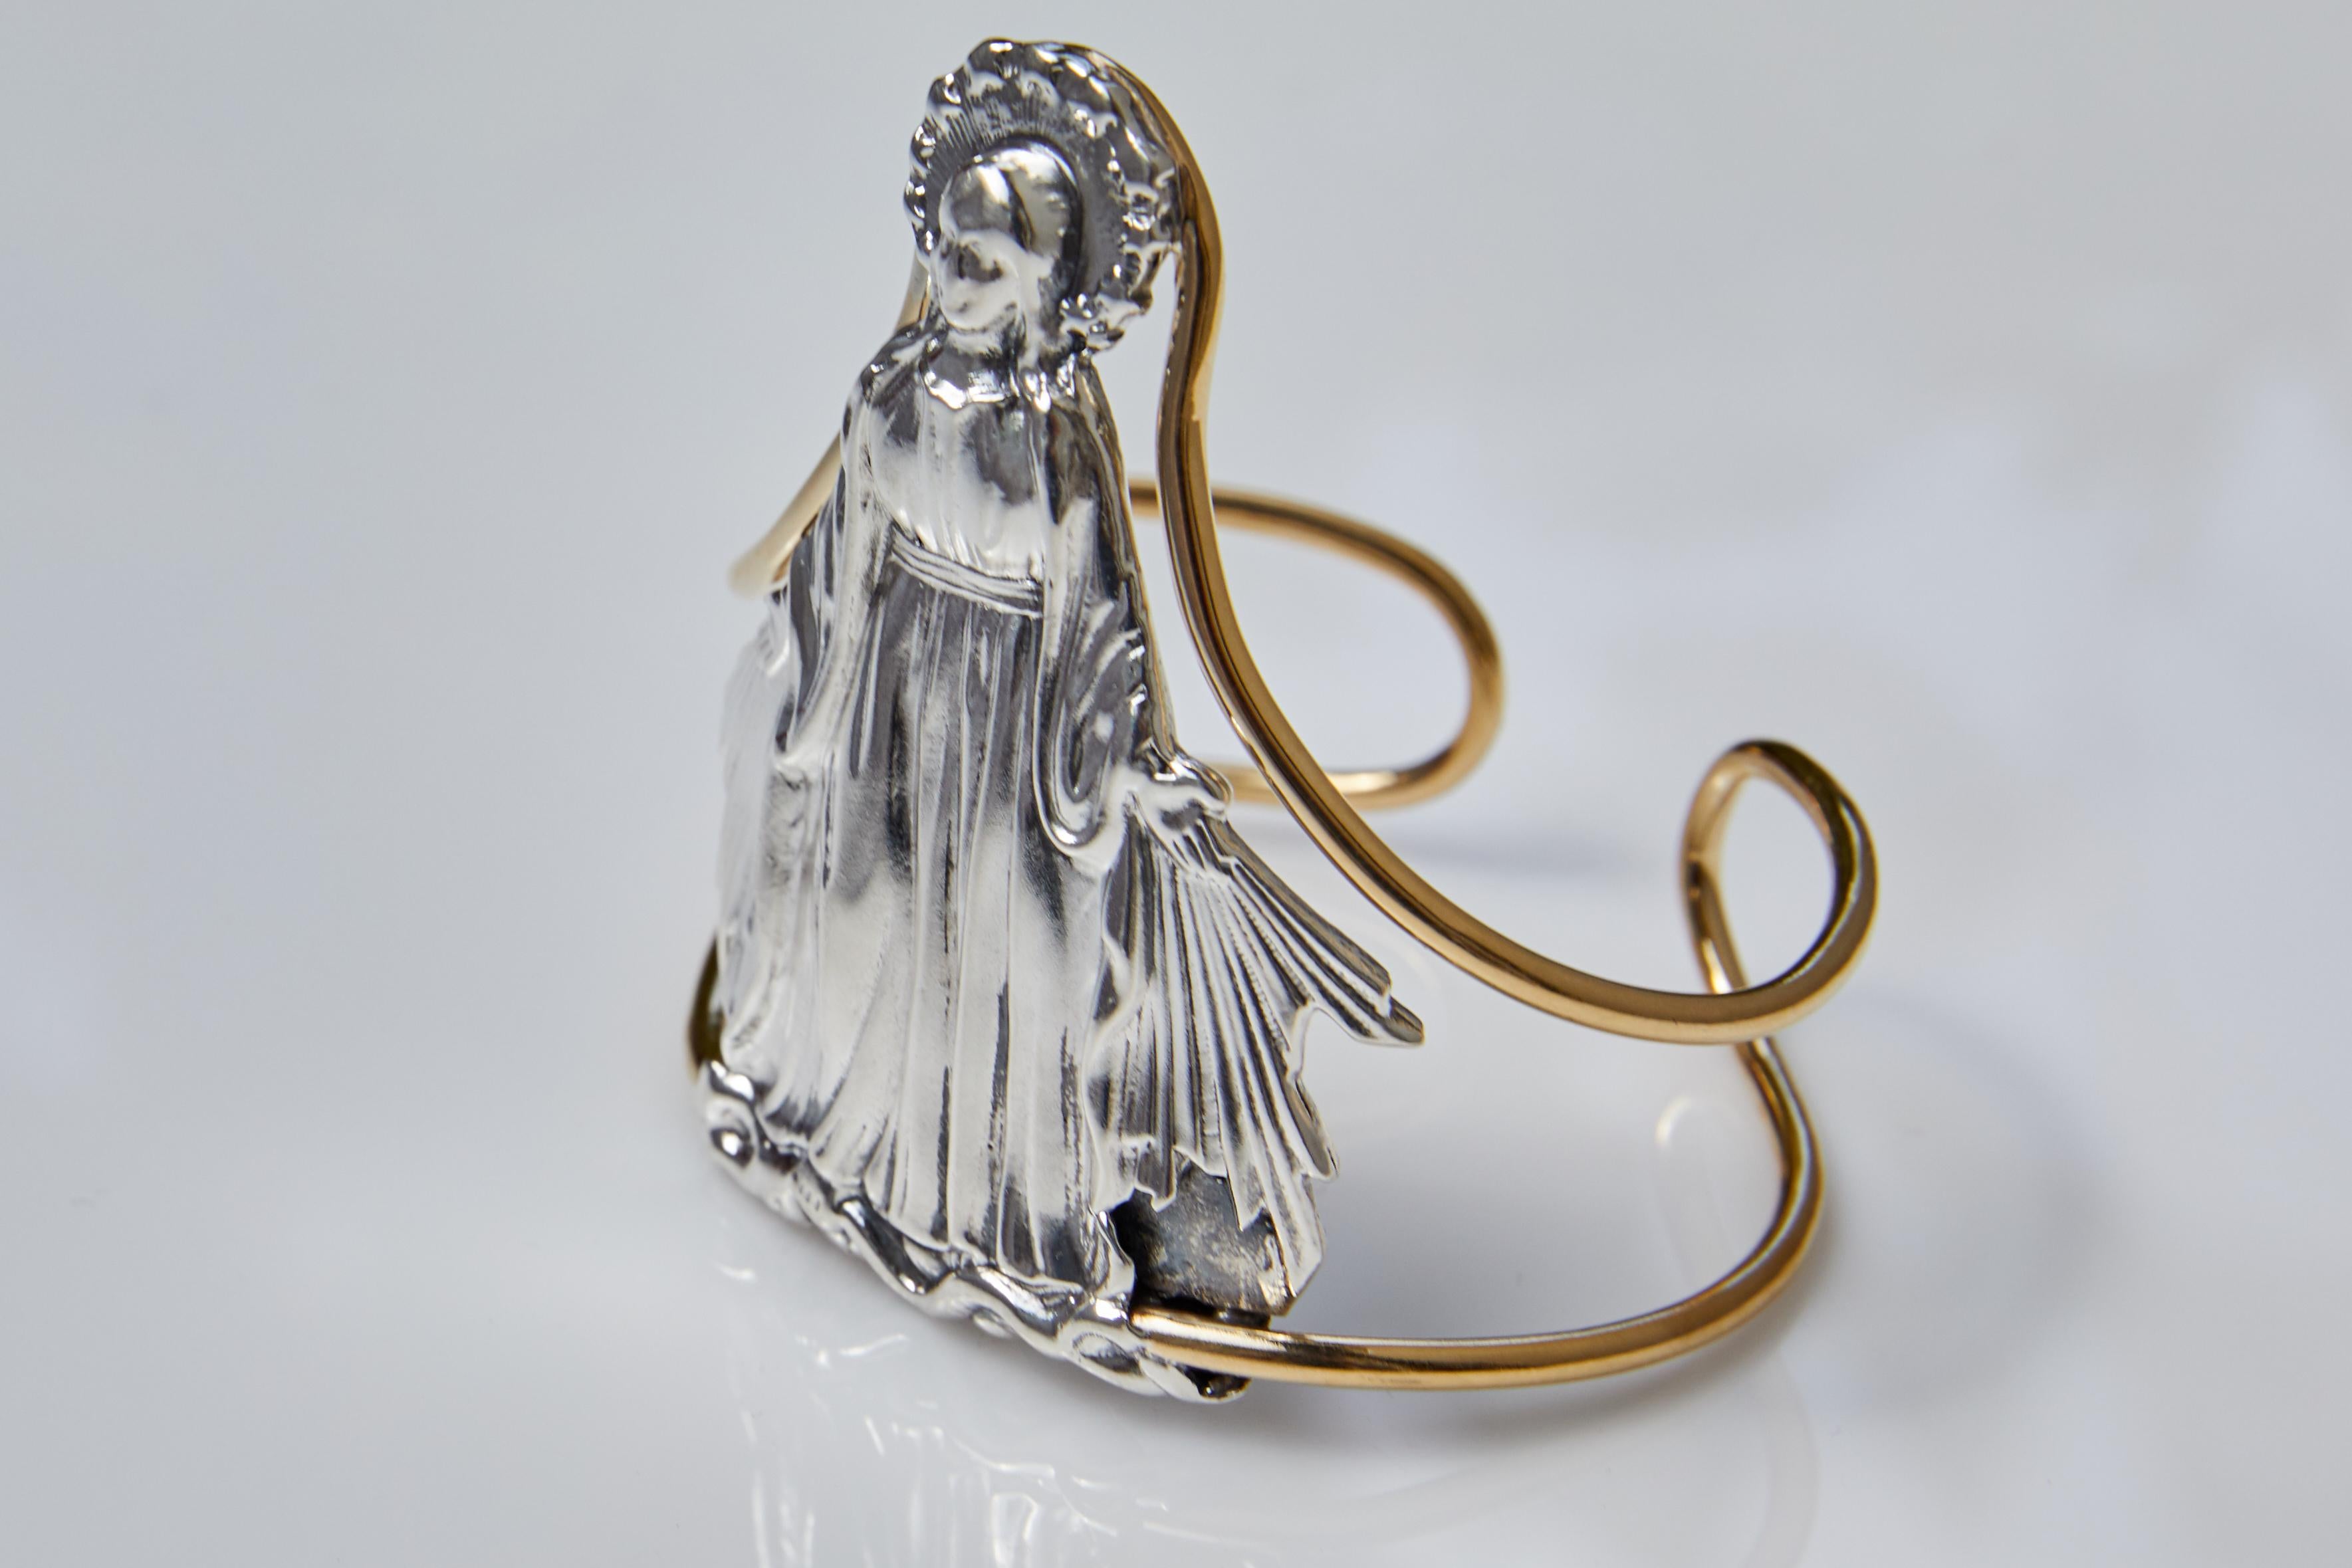 Round Cut Virgin Mary Mother Mary Cuff Bangle Bracelet Statement Silver Brass J Dauphin For Sale